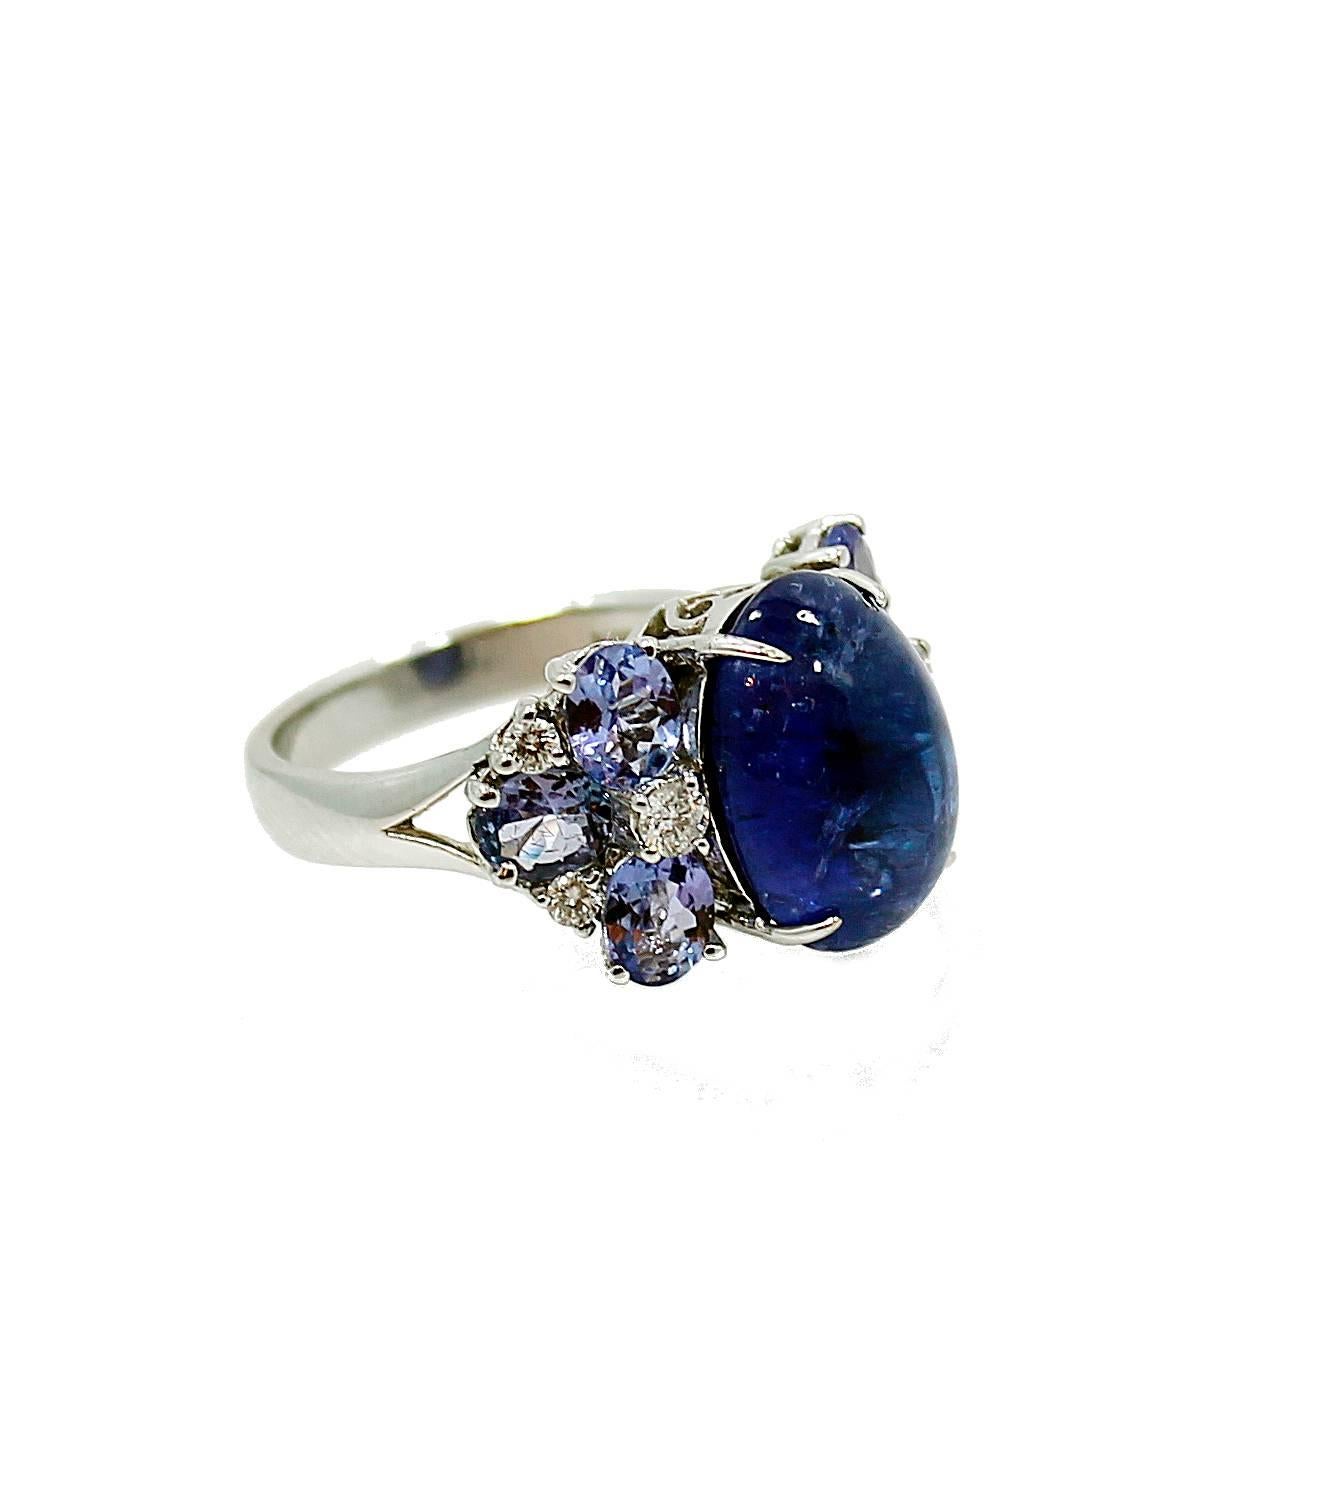 7.66 Carat Cabachon Tanzanite Diamond Gold Ring In Excellent Condition For Sale In Naples, FL